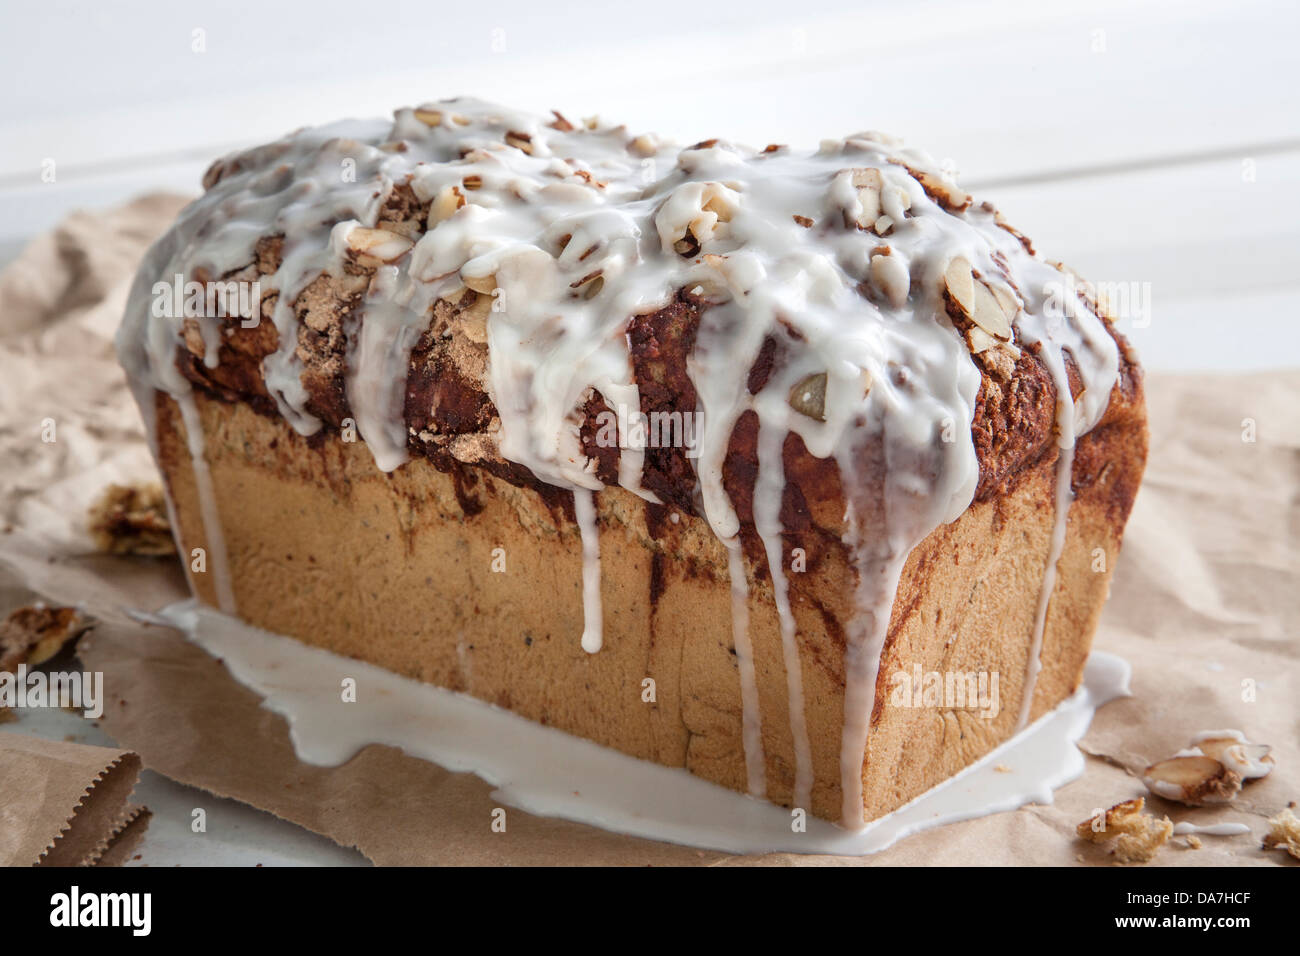 strawberry dessert bread with icing whole slices Stock Photo